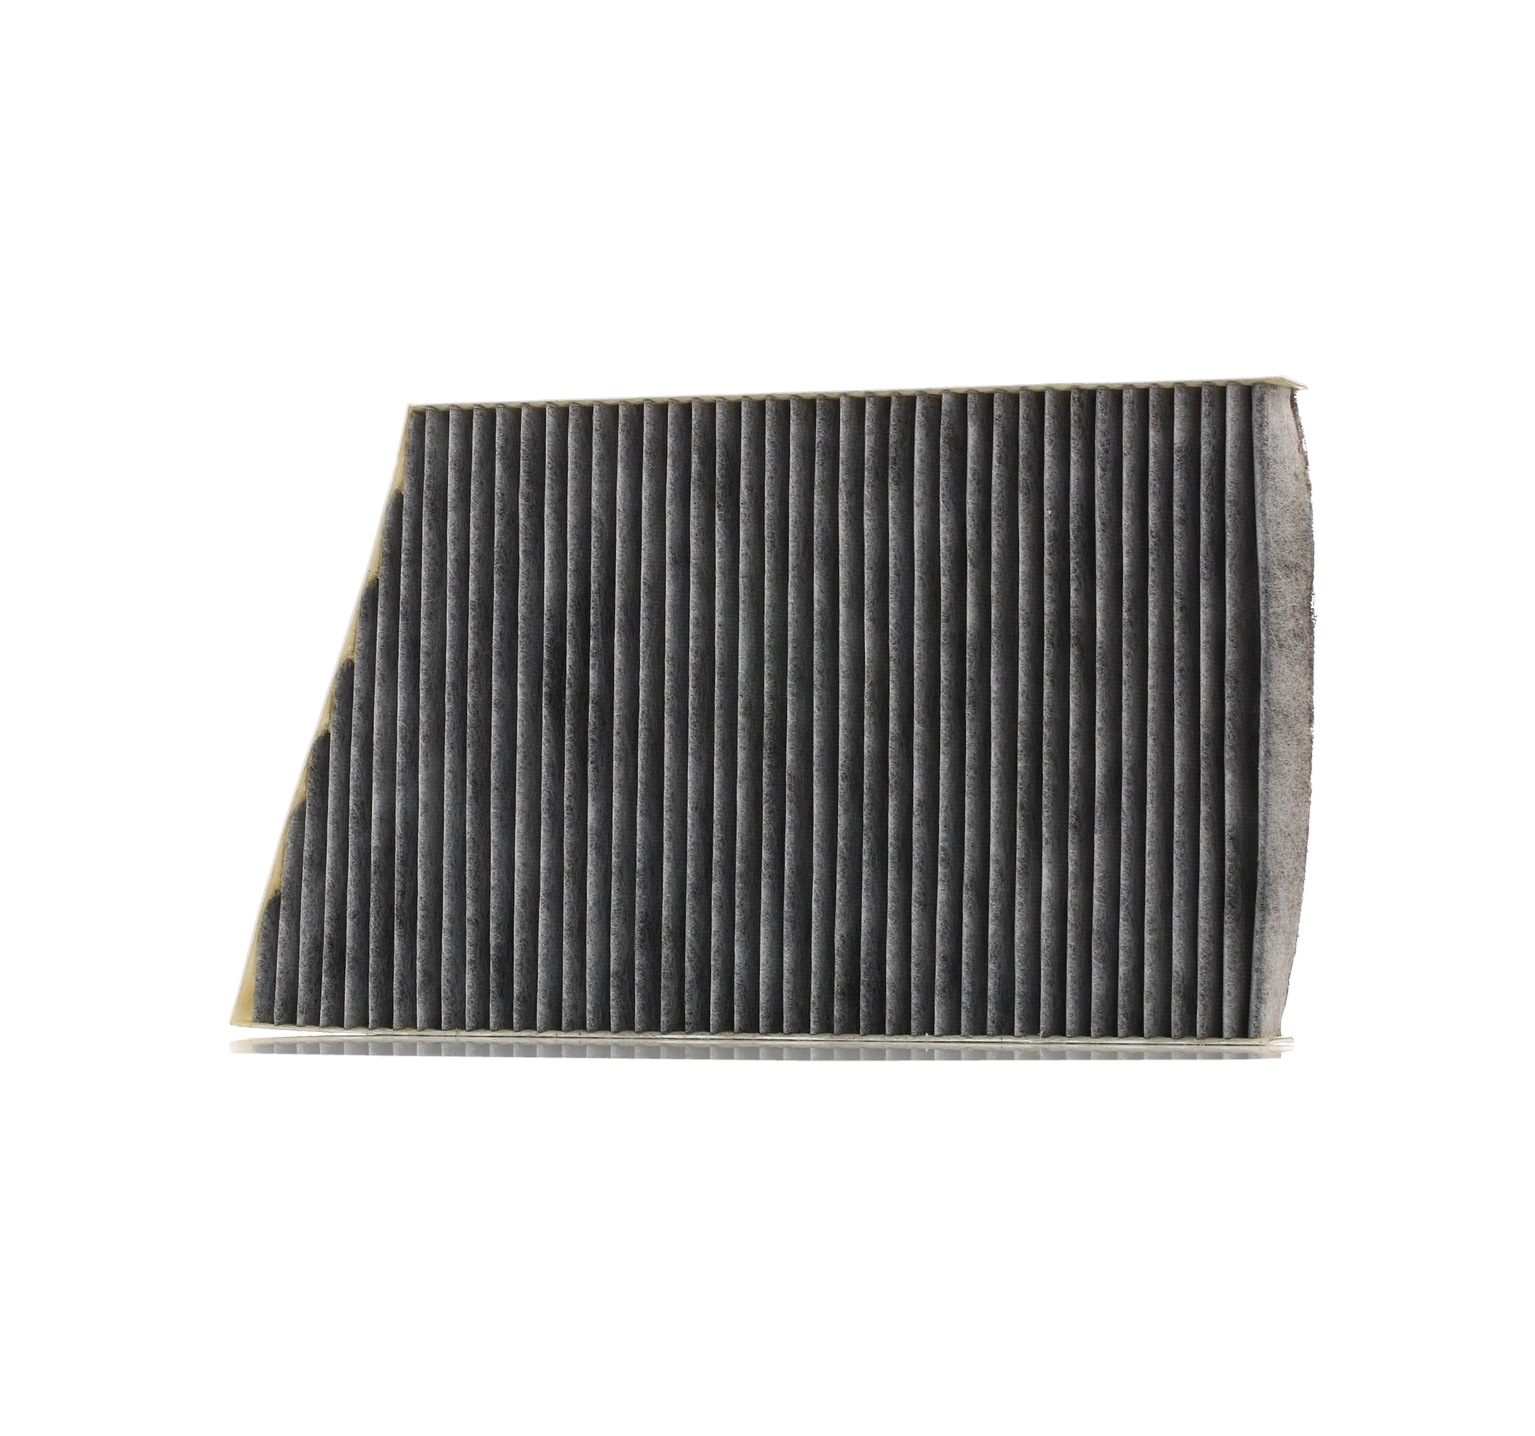 76889489 MAHLE ORIGINAL Activated Carbon Filter, 332,0 mm x 189, 192 mm x 25,0 mm Width: 189, 192mm, Height: 25,0mm, Length: 332,0mm Cabin filter LAK 129/1 buy